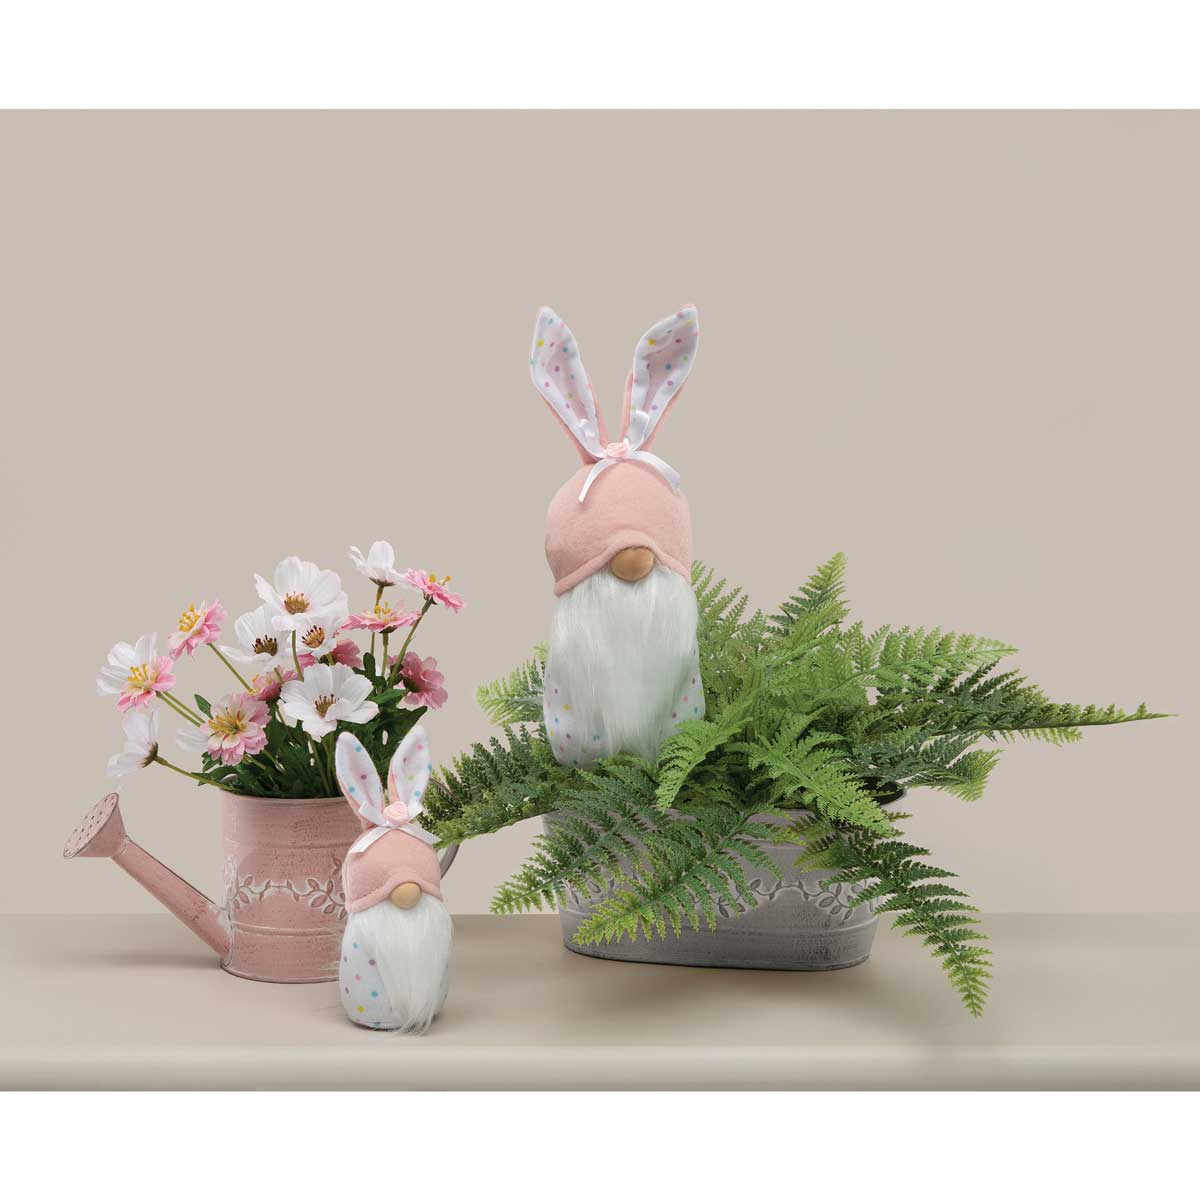 b70 GNOME PINDOT BUNNY SMALL 2.5IN X 4IN X 6.5IN WHITE/PINK